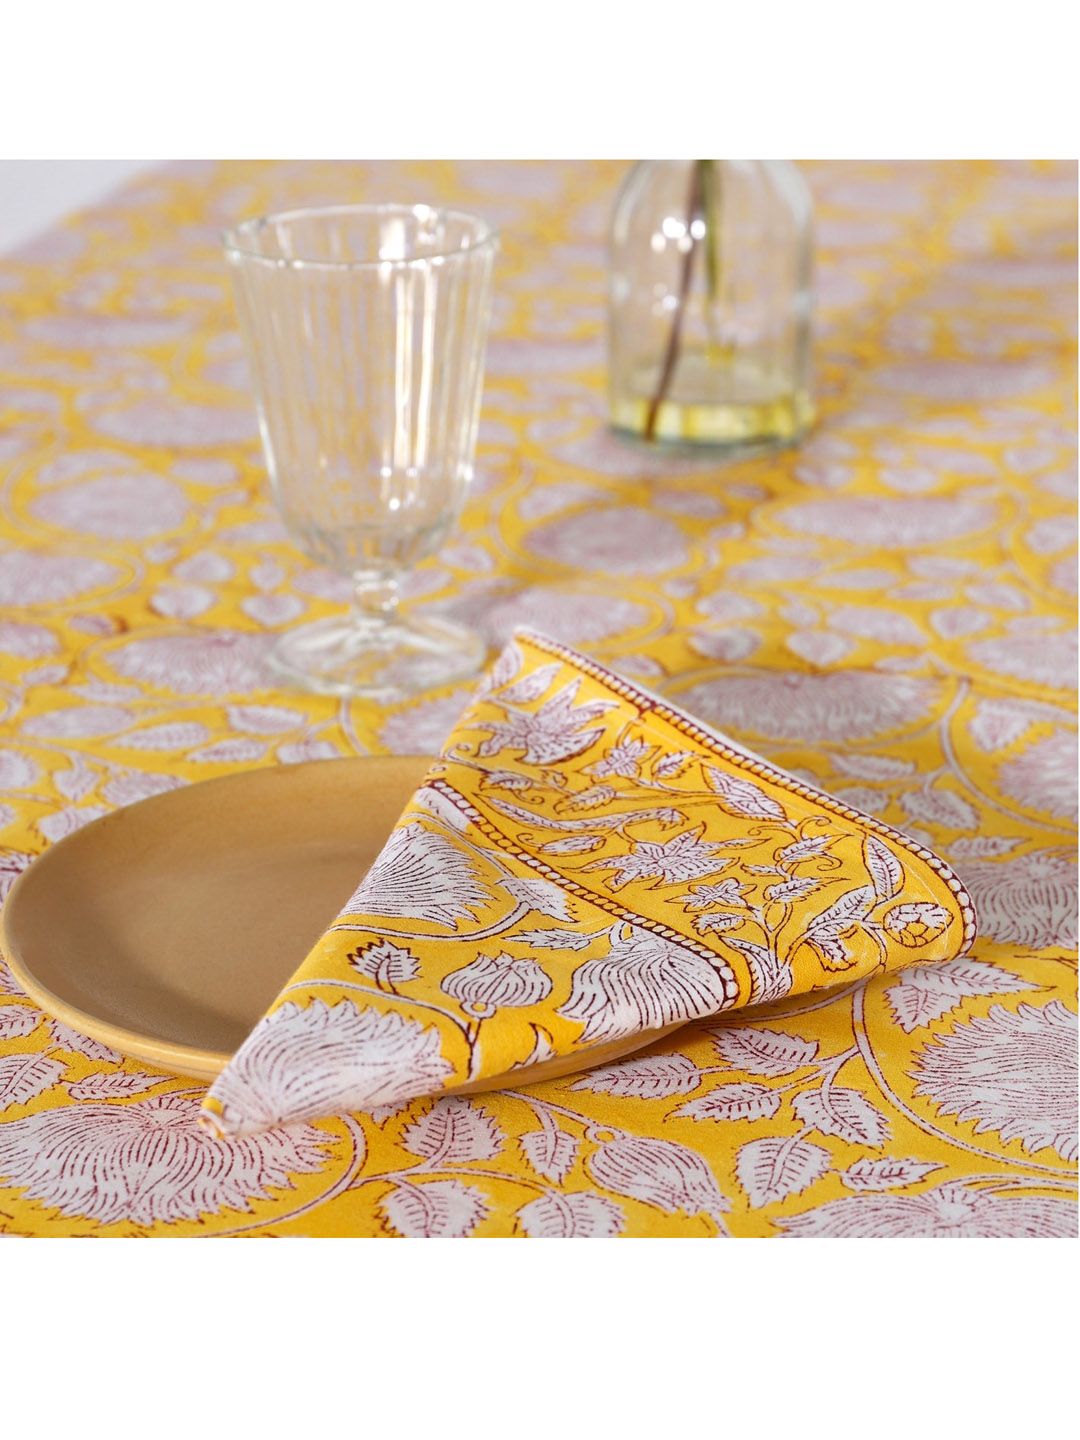 HANDICRAFT PALACE Yellow & White Hand Block Printed 6 Seater Cotton Table Covers With 6 Napkins Price in India